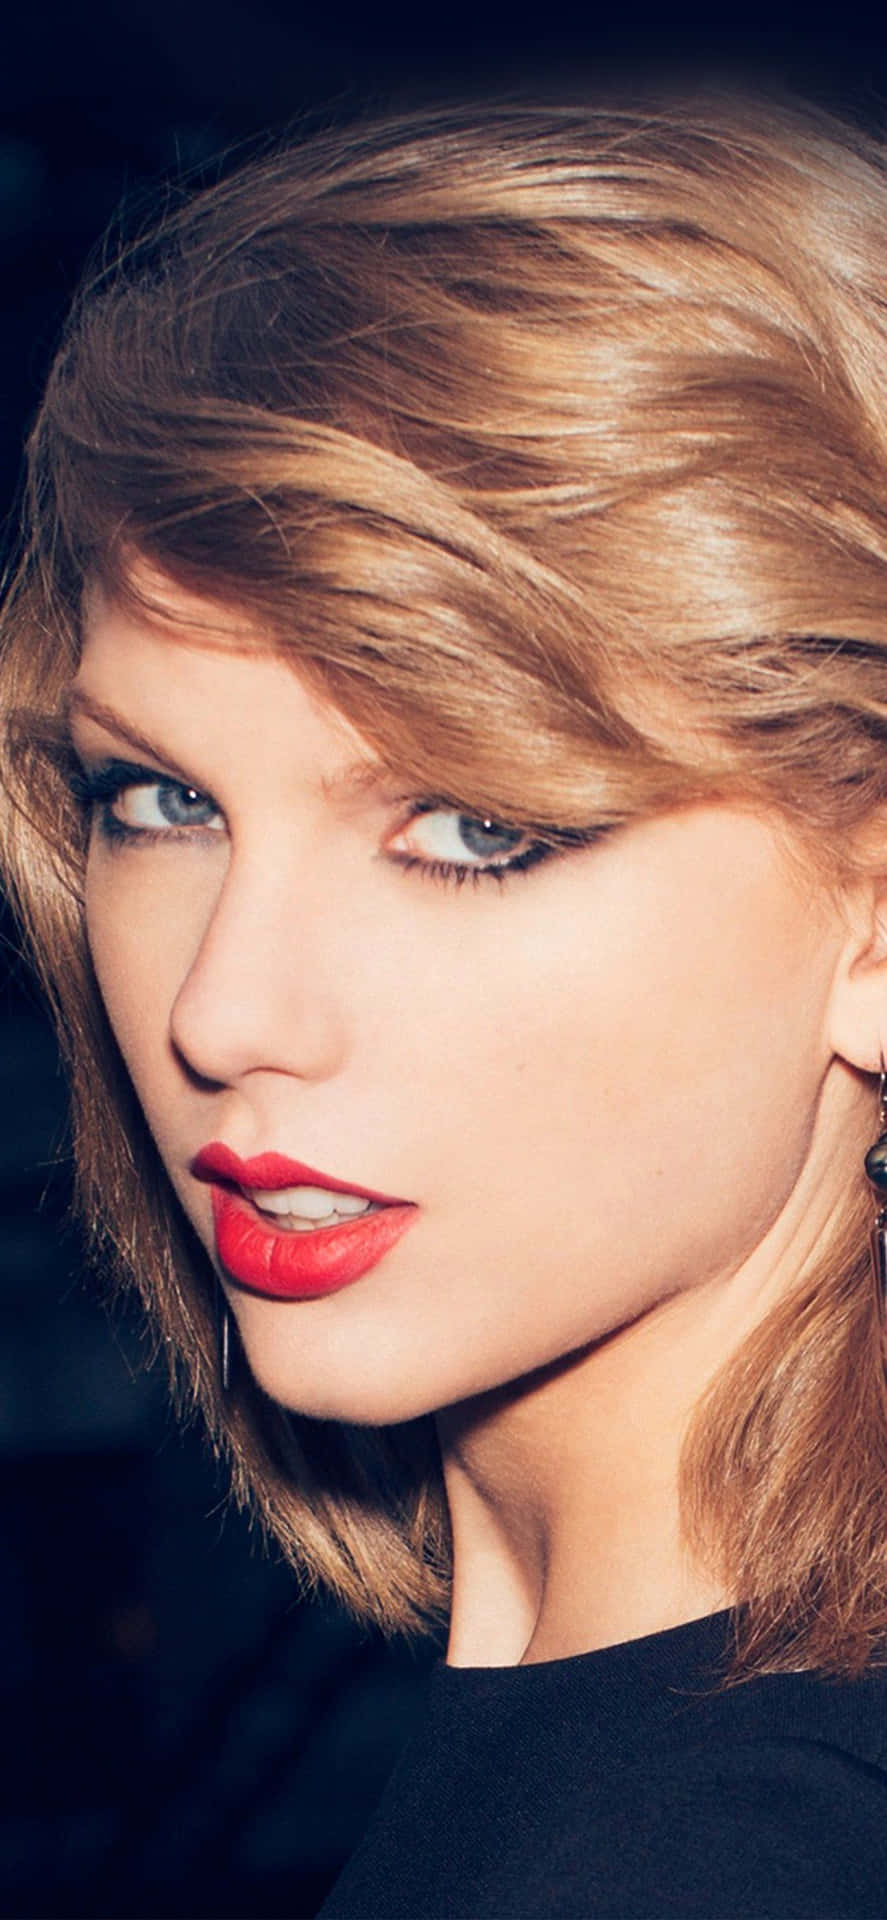 Get Ready to Rock Out with Taylor Swift's Official iPhone Wallpaper